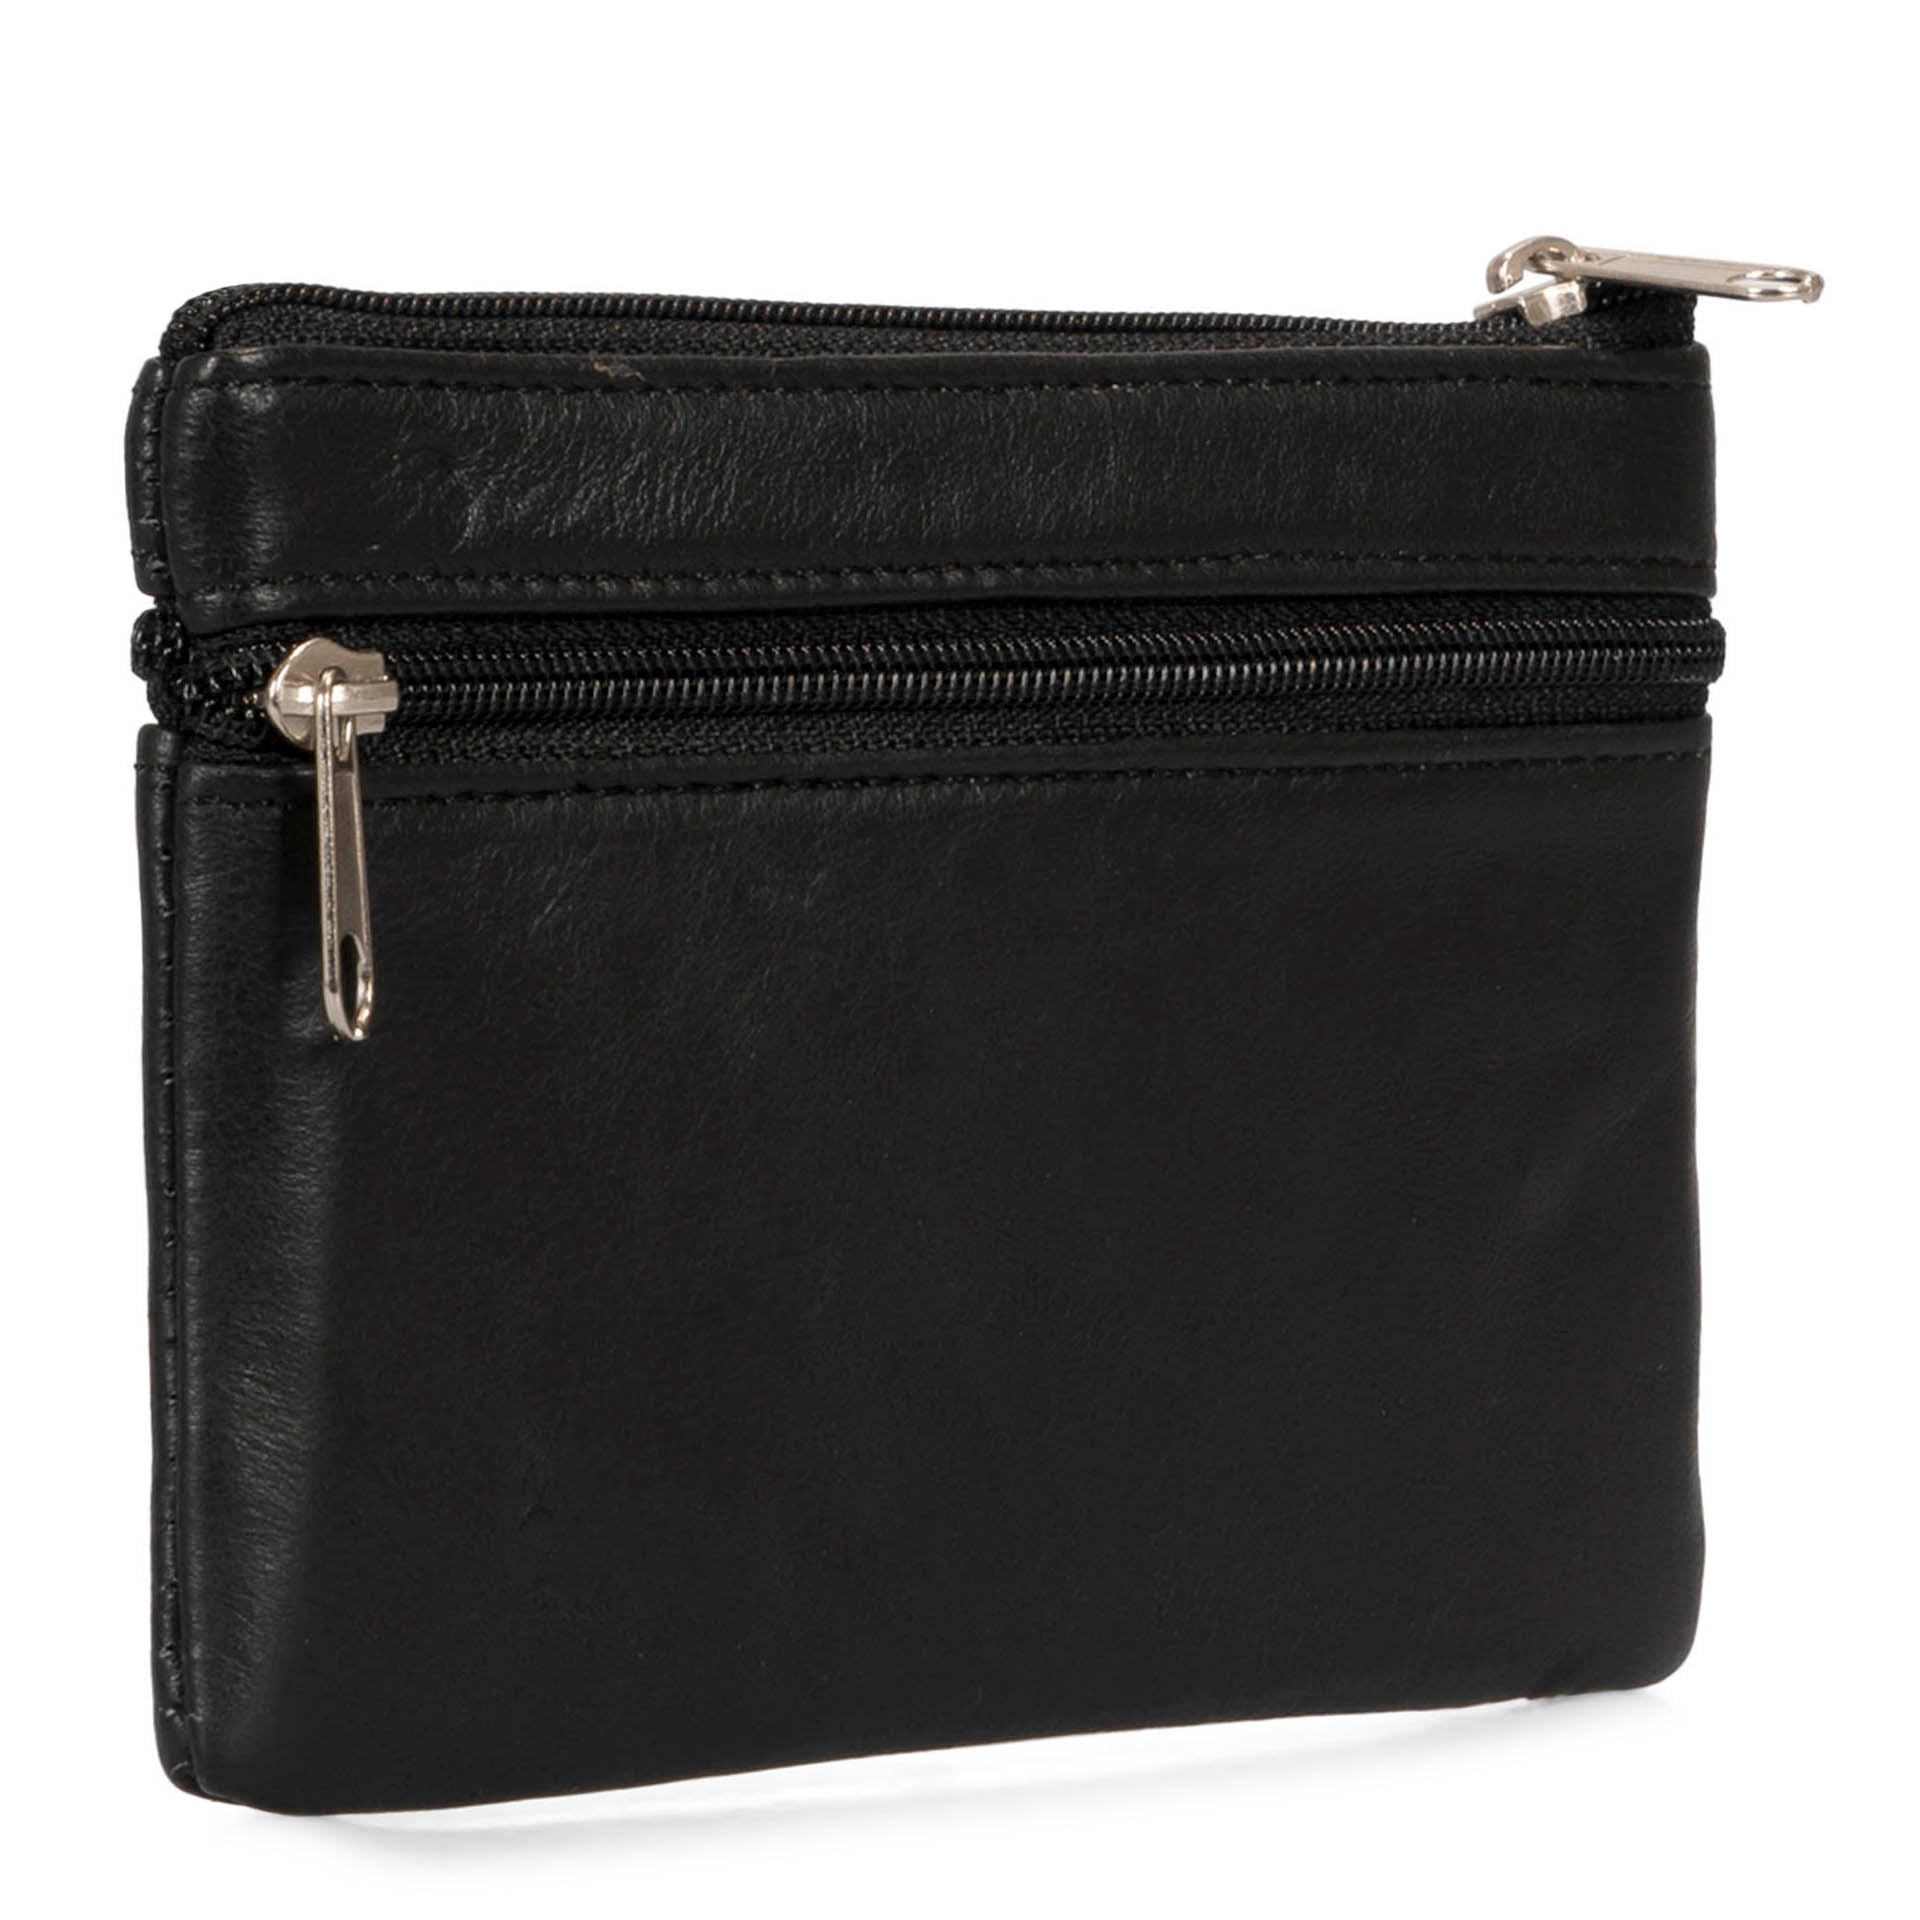 Lg 3 Zip Coin Purse - Ace Leather Goods, Inc.